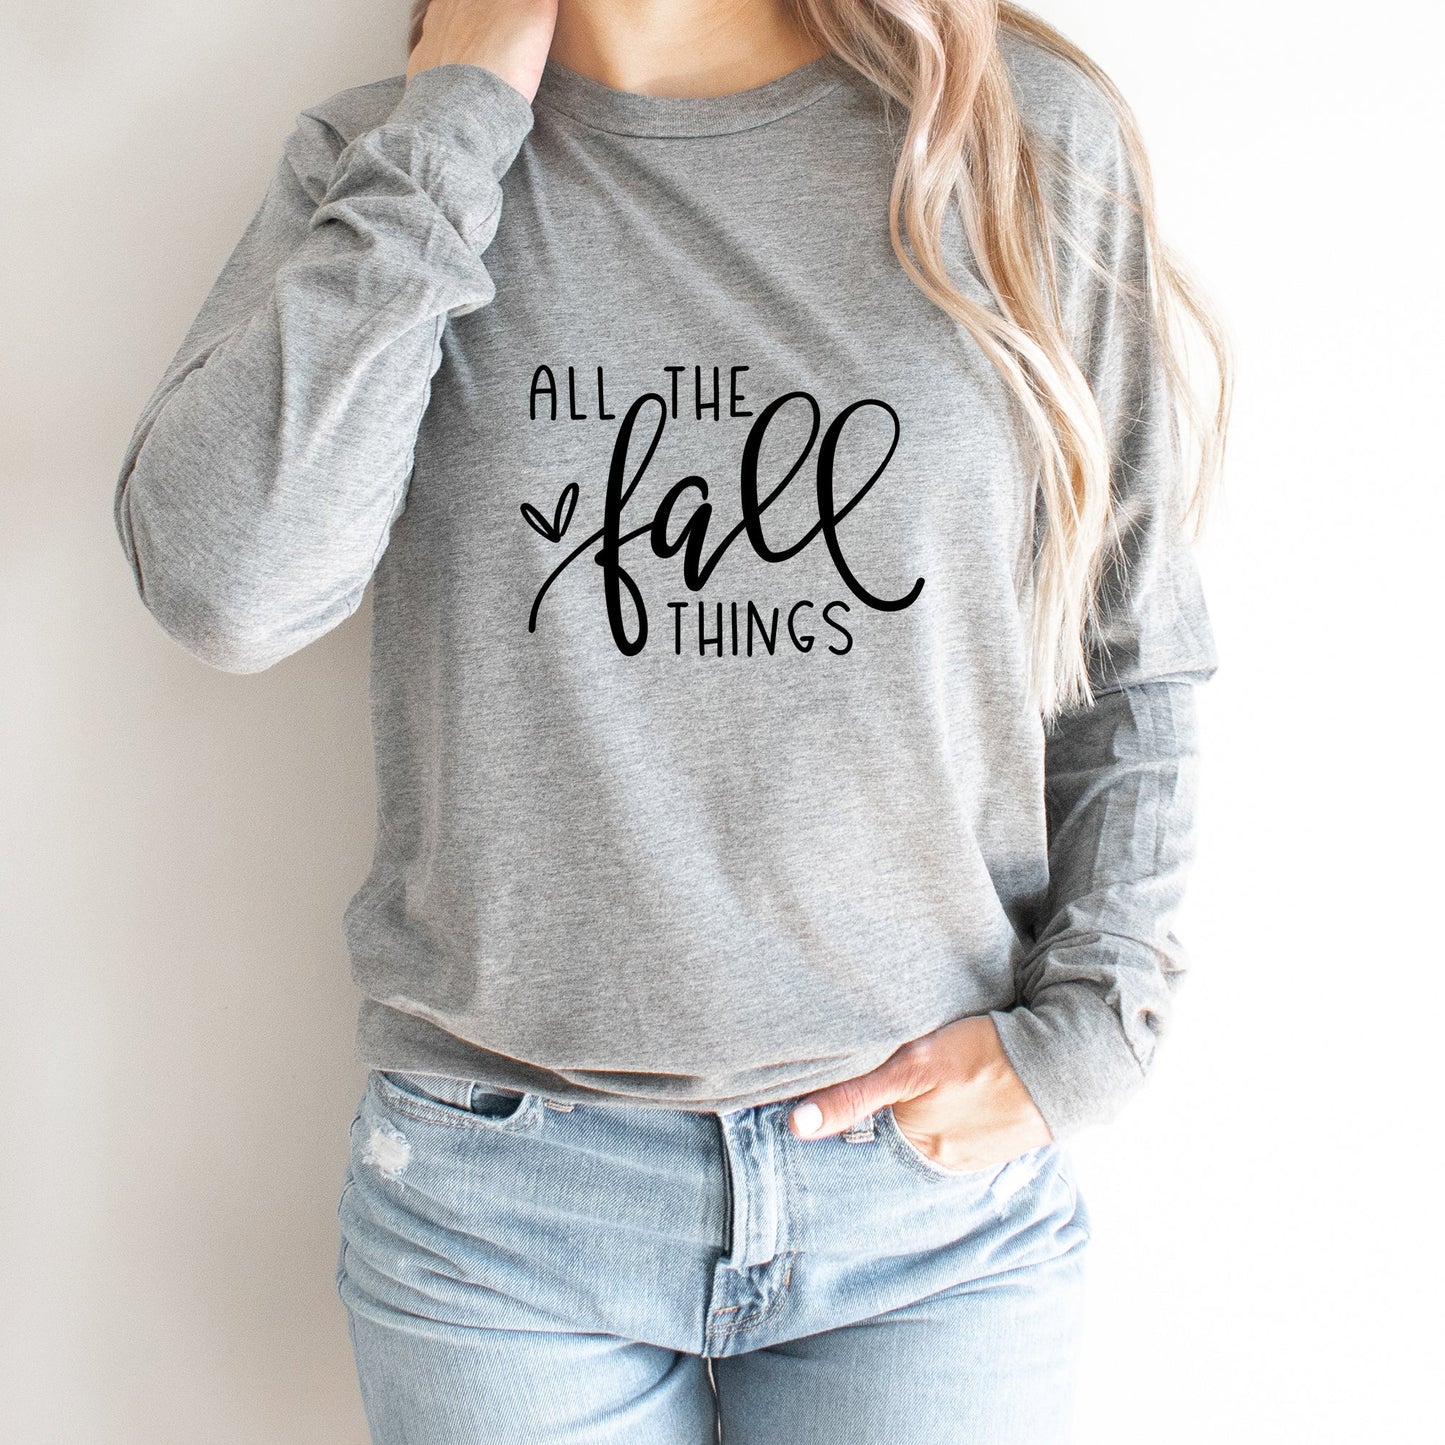 All The Fall Things | Long Sleeve Crew Neck